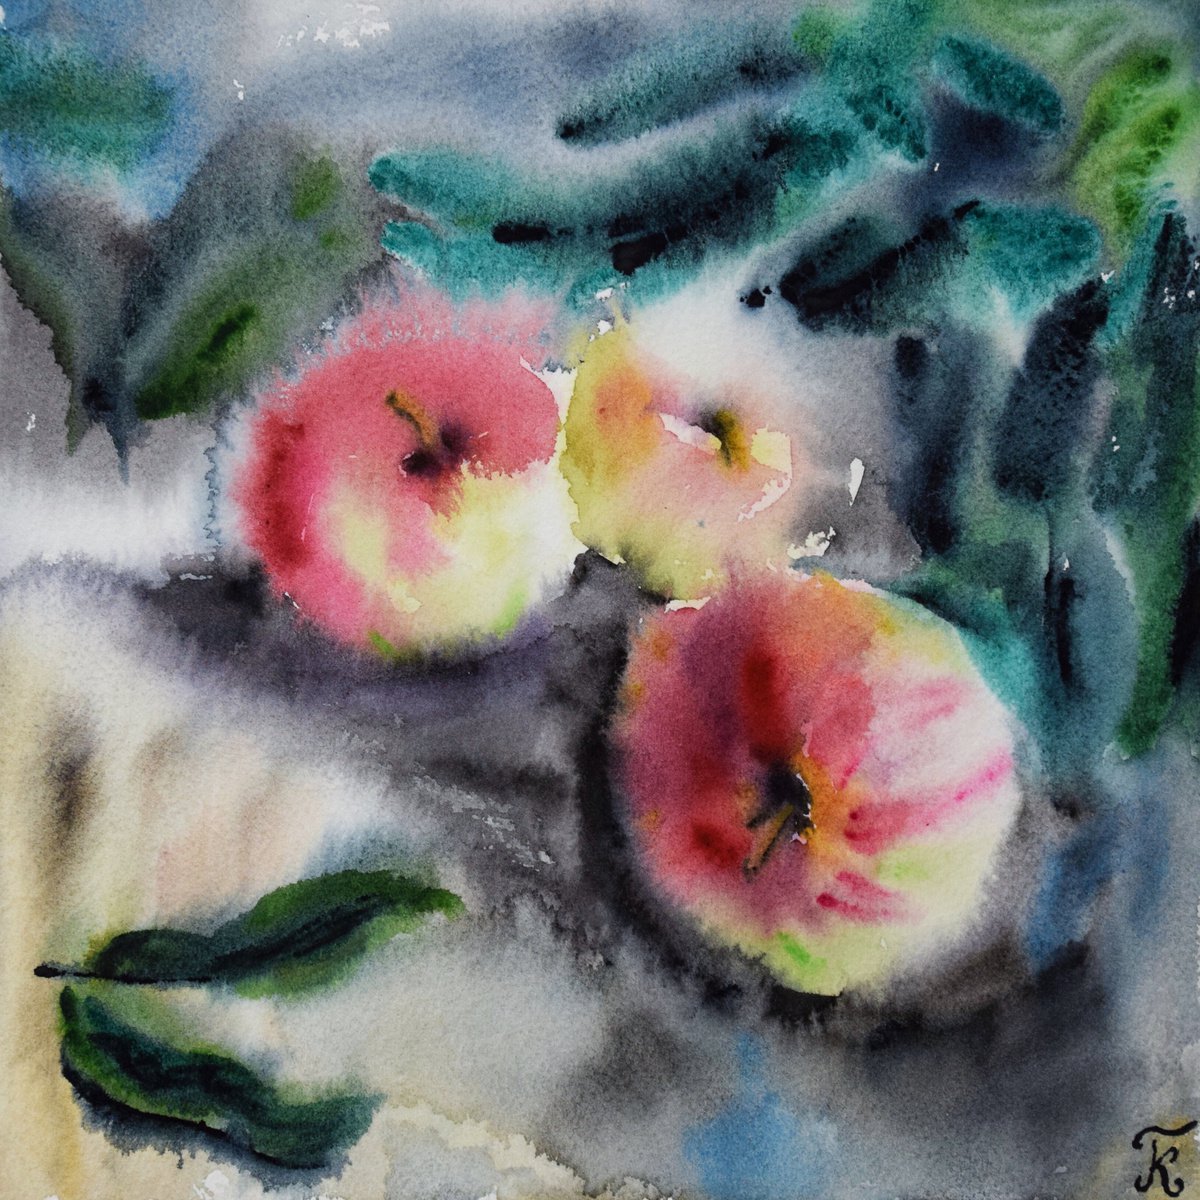 Apples painting, fruit watercolor painting original, kitchen wall art by Kate Grishakova